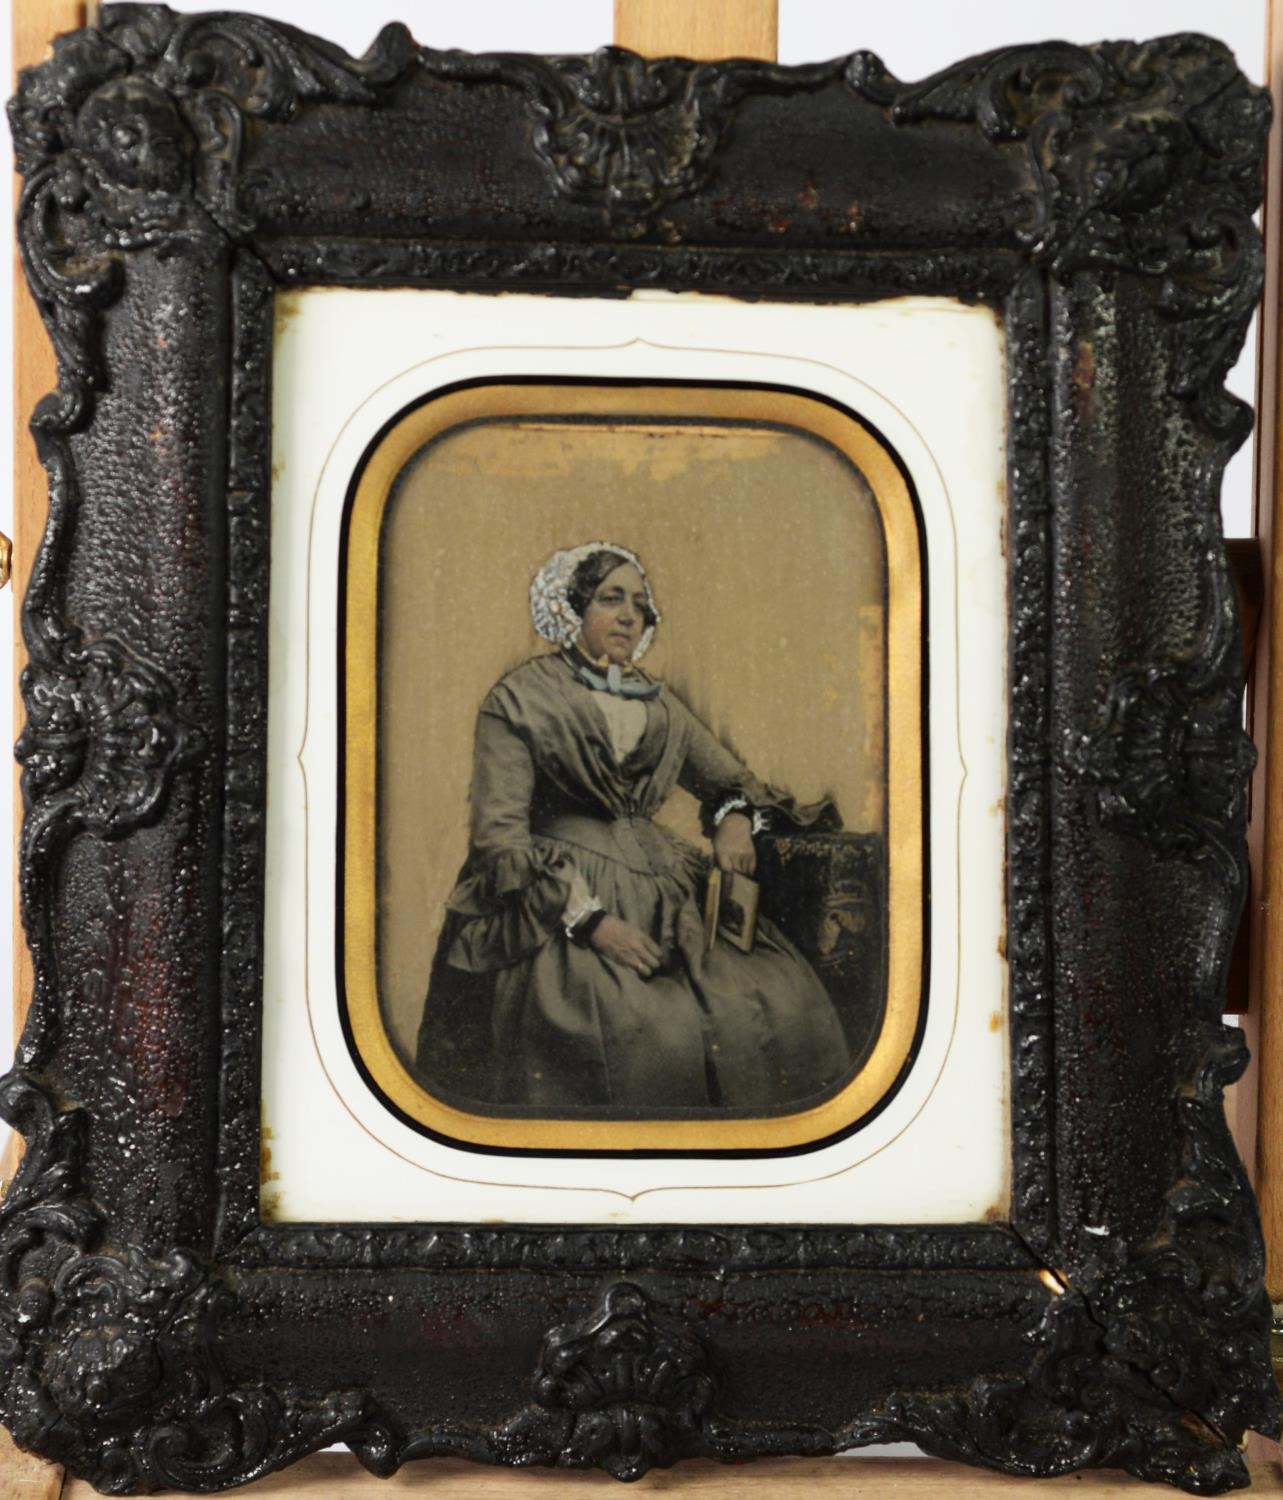 TWO VICTORIAN SLIGHLY TINTED PORTRAIT DAGUERREOTYPES in original glazed frames, ONE with revealed - Image 3 of 4